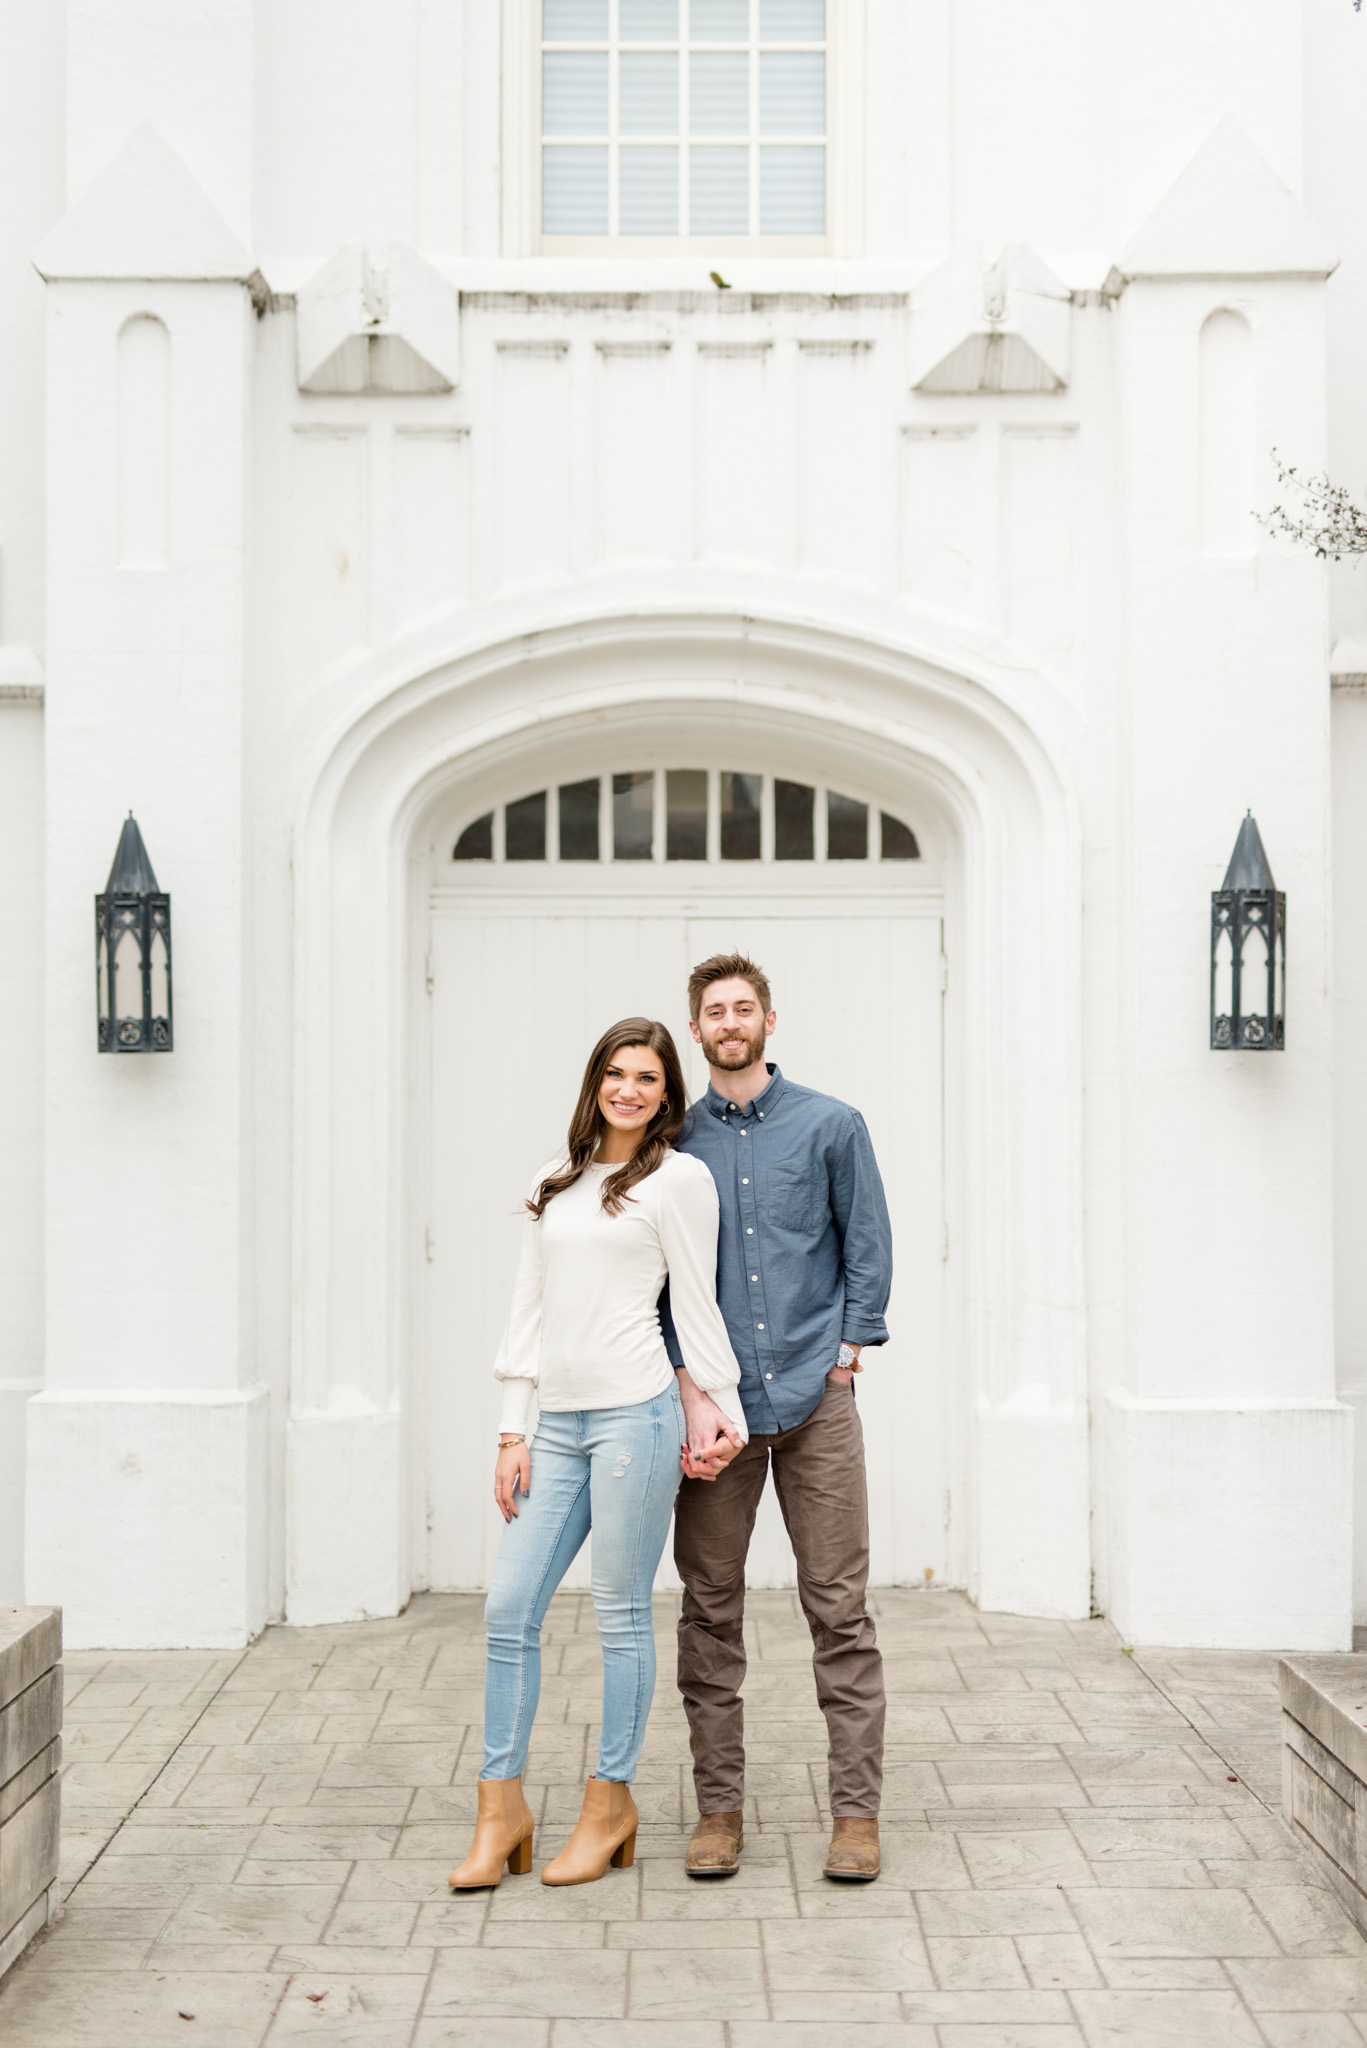 Couple smiles at camera in front of white building.